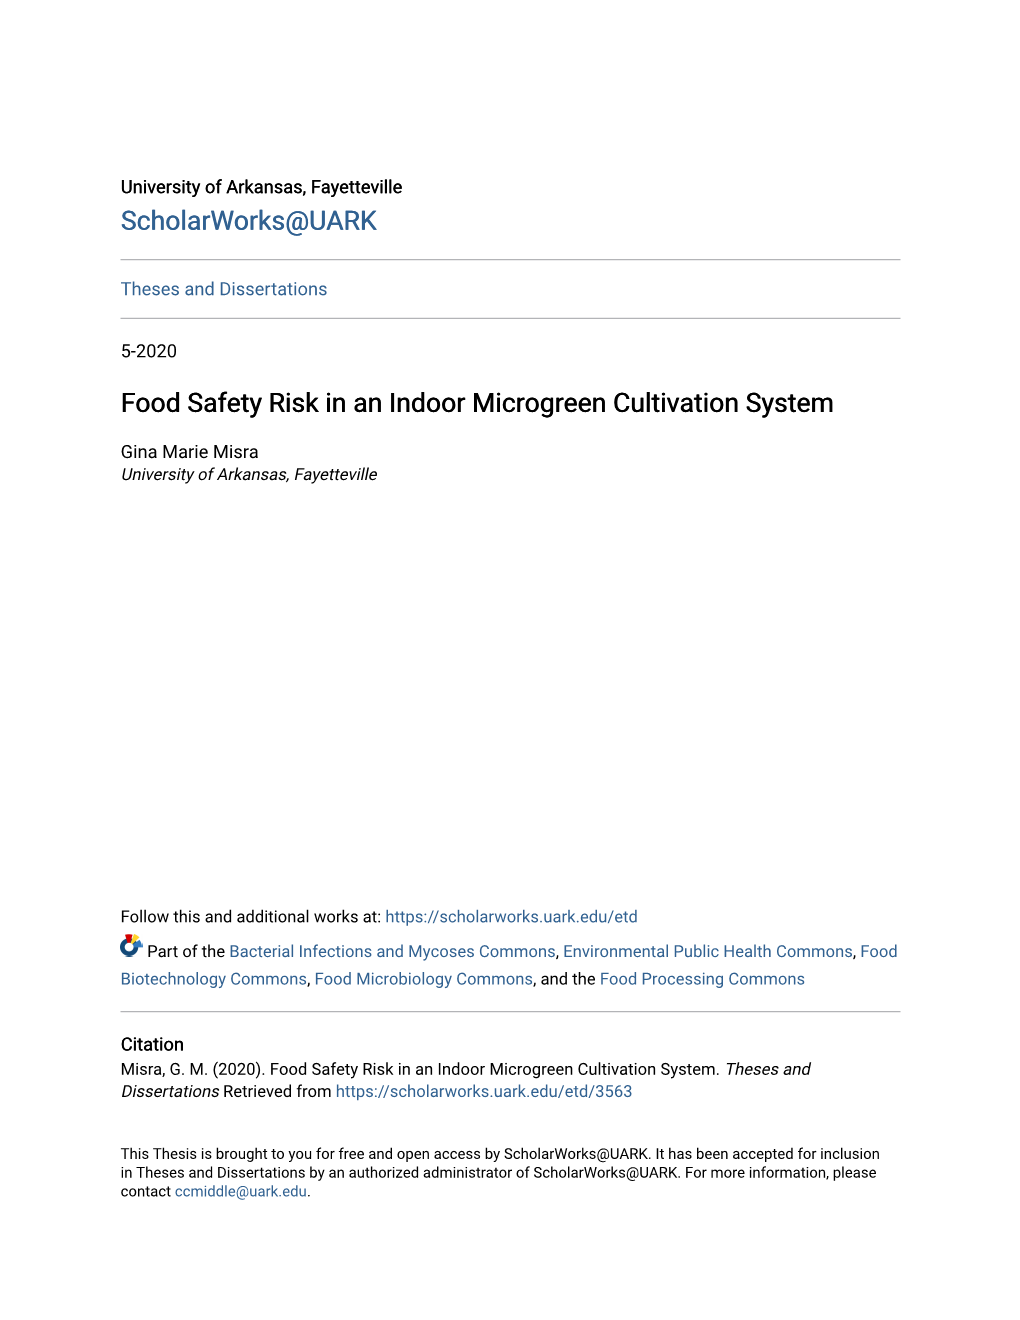 Food Safety Risk in an Indoor Microgreen Cultivation System